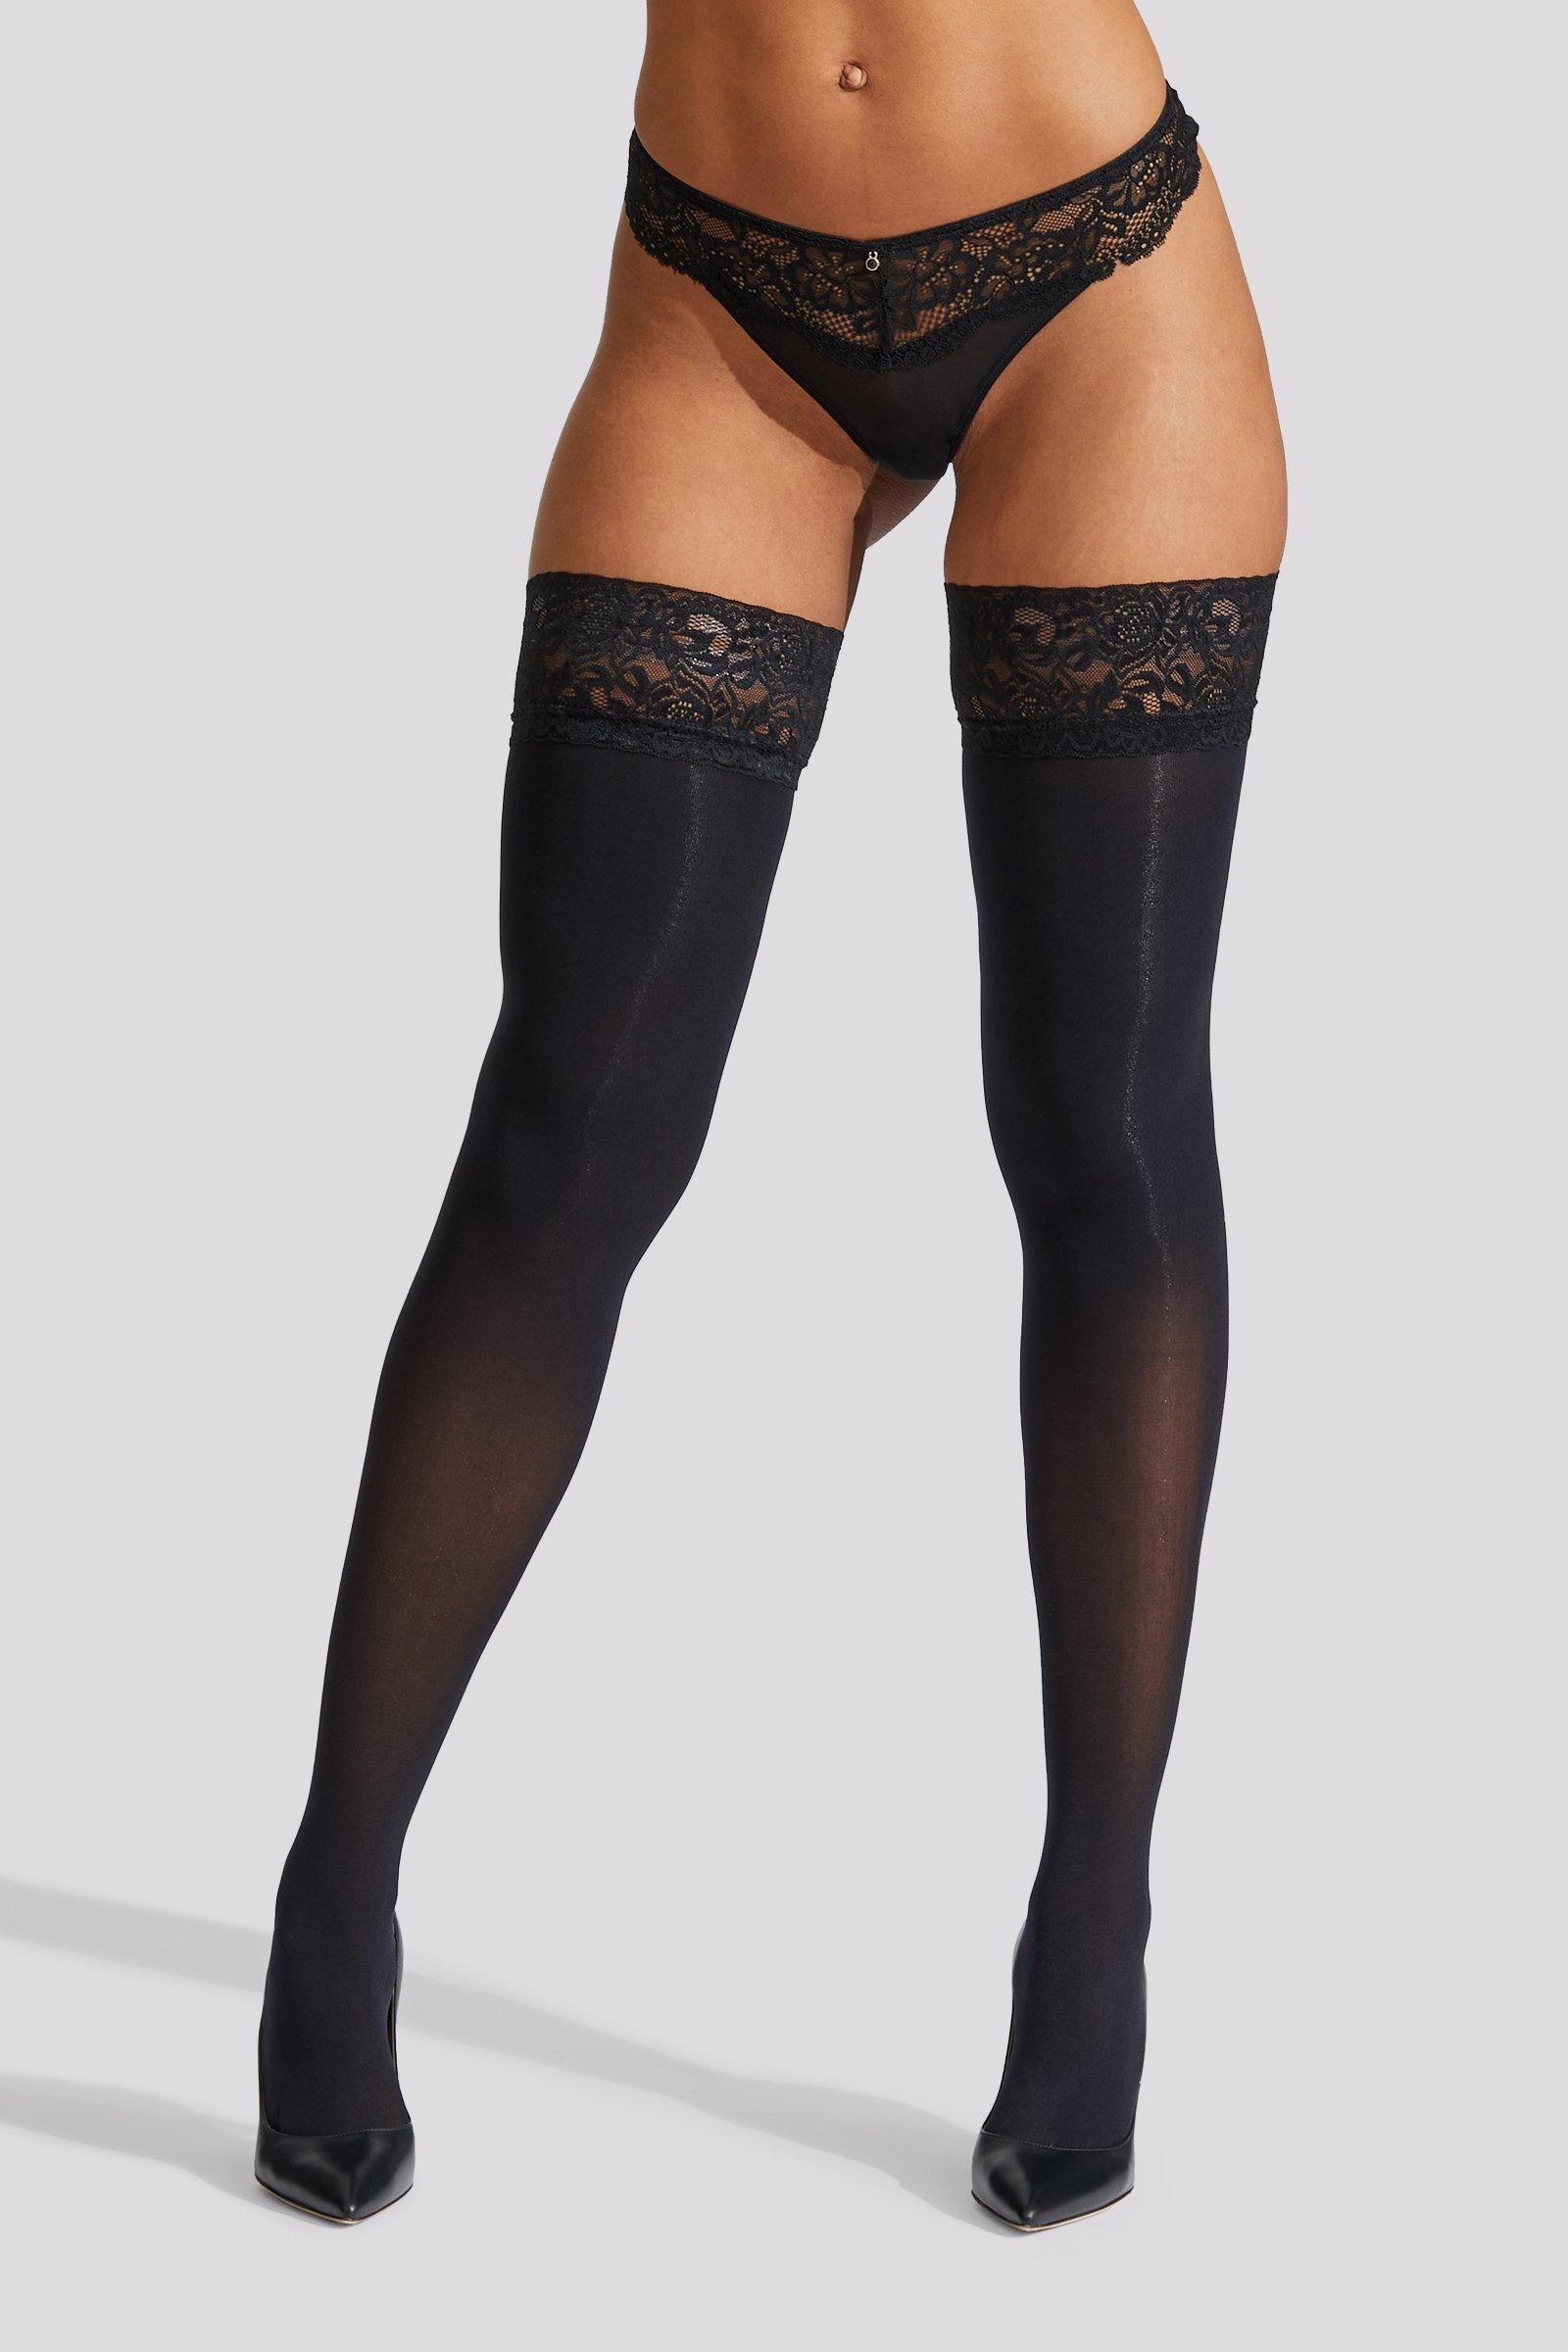 lace welt opaque hold ups